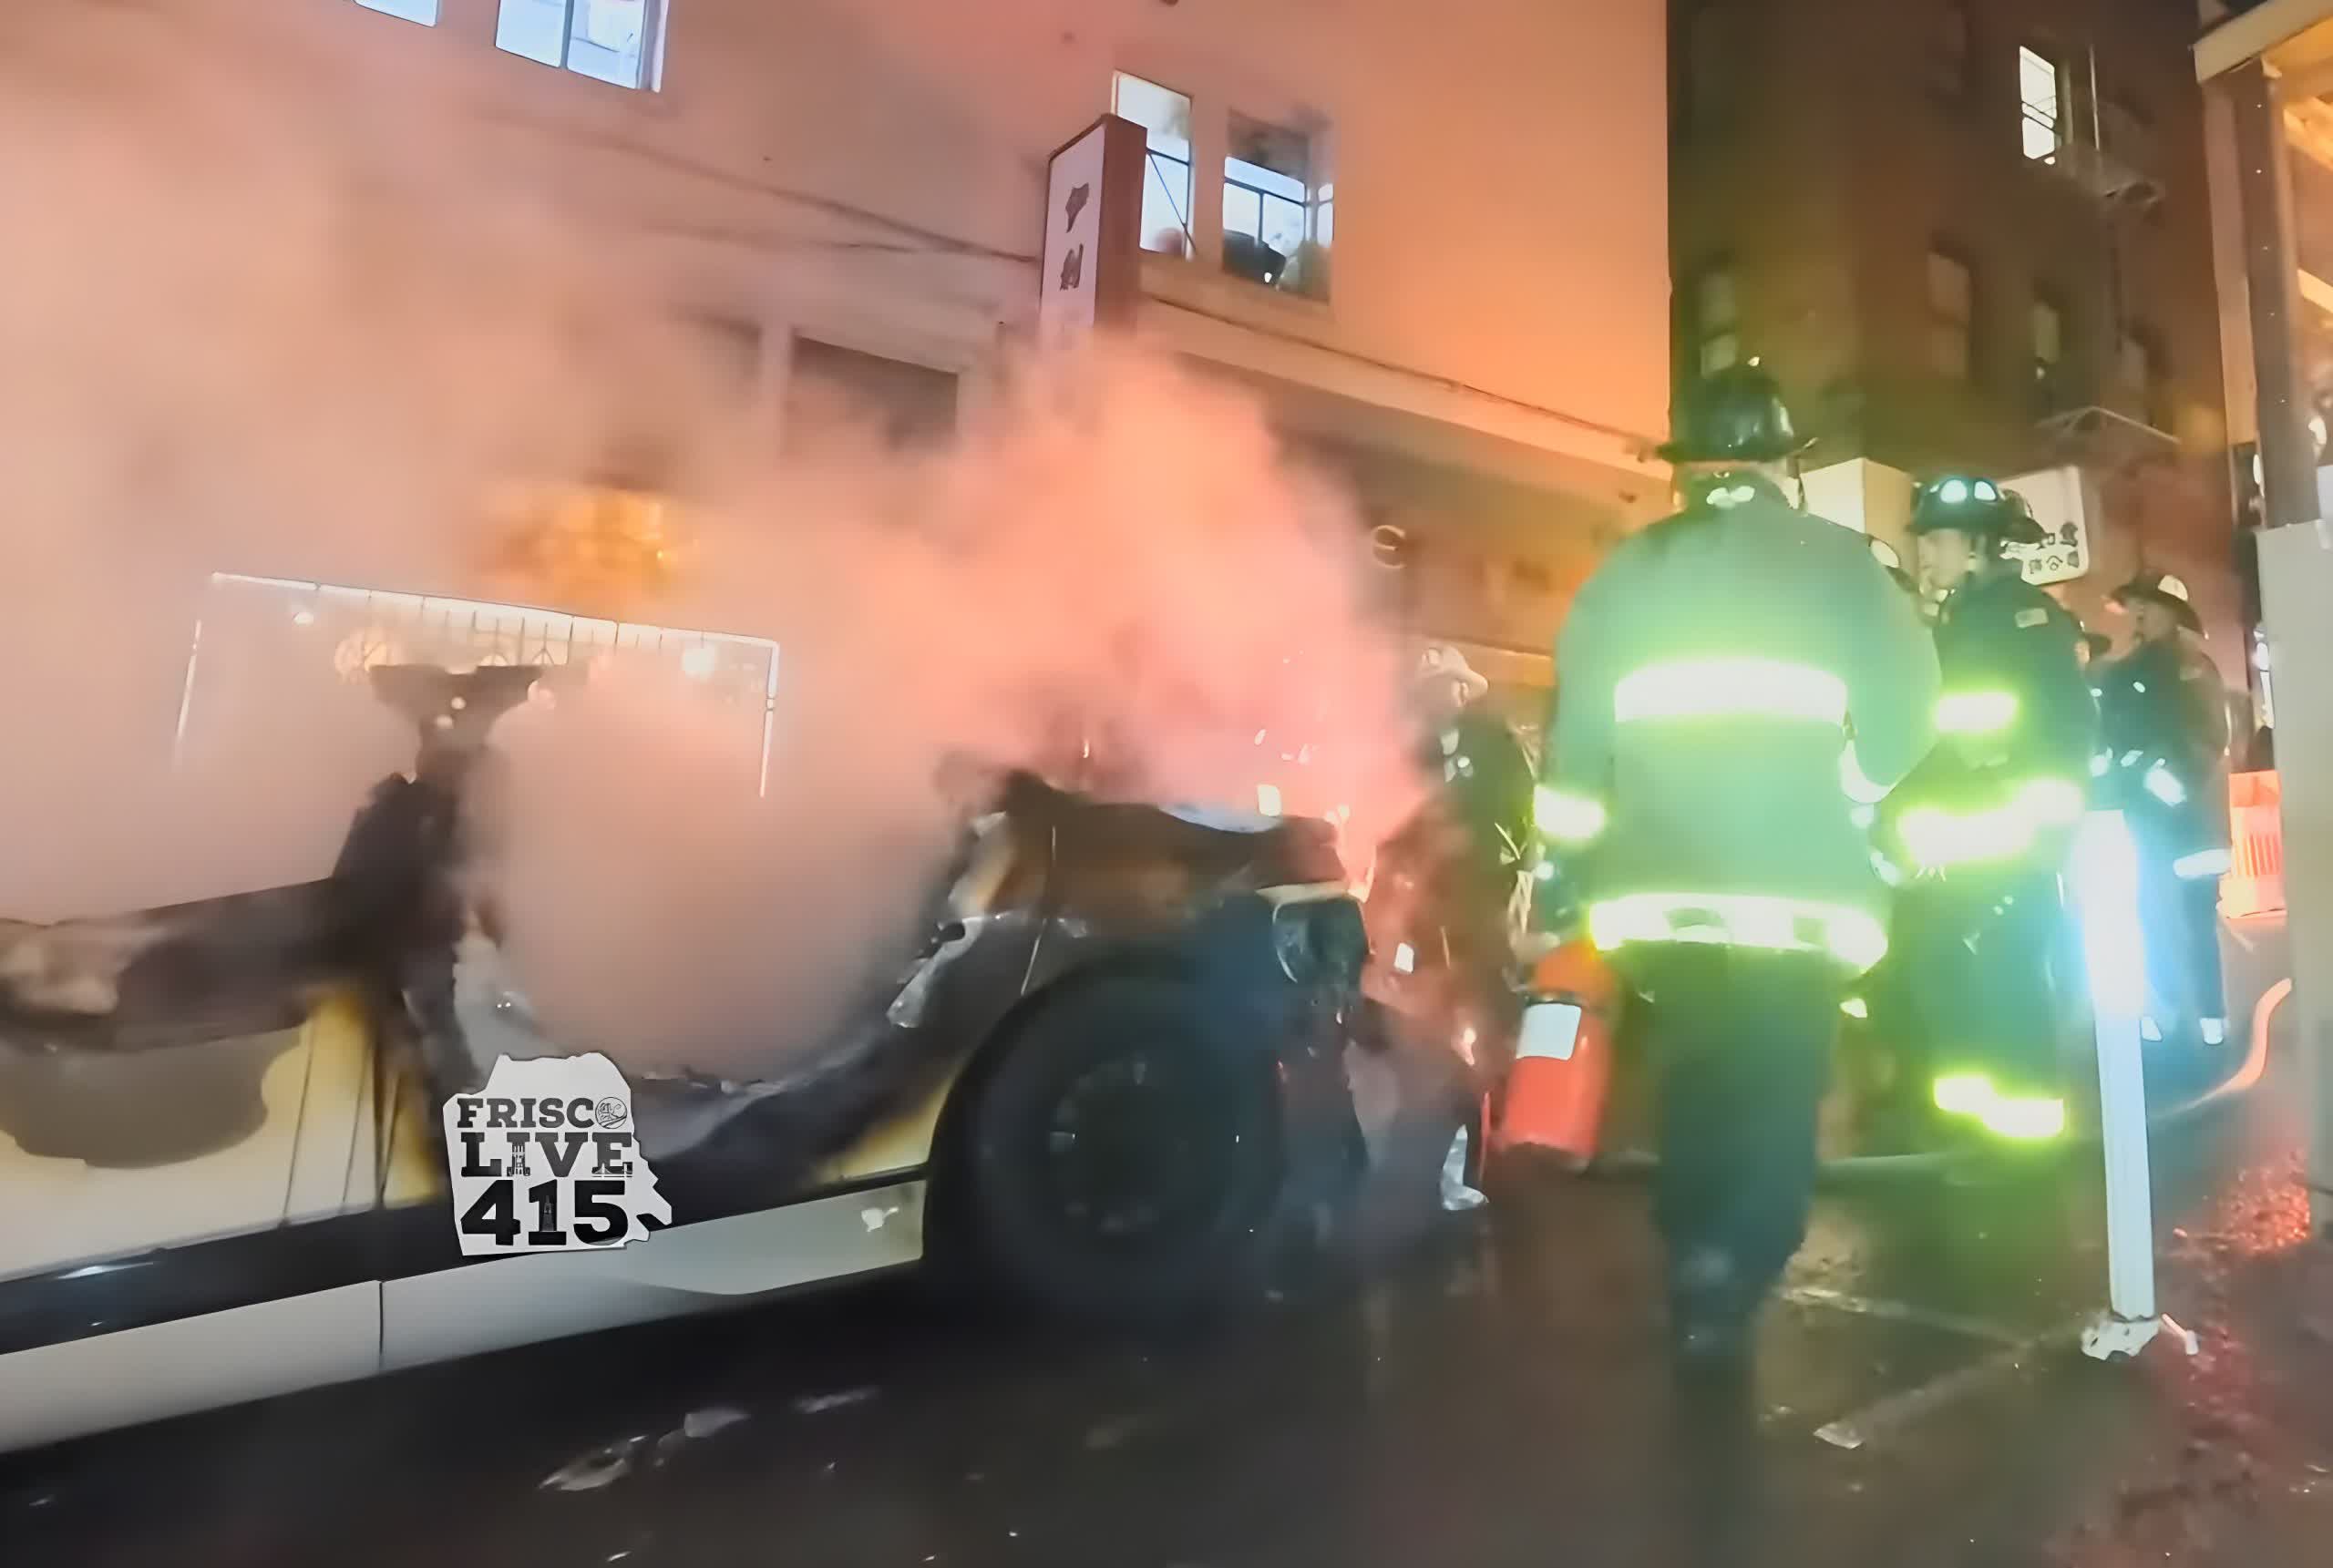 Waymo self-driving taxi vandalized and set ablaze by San Francisco crowd